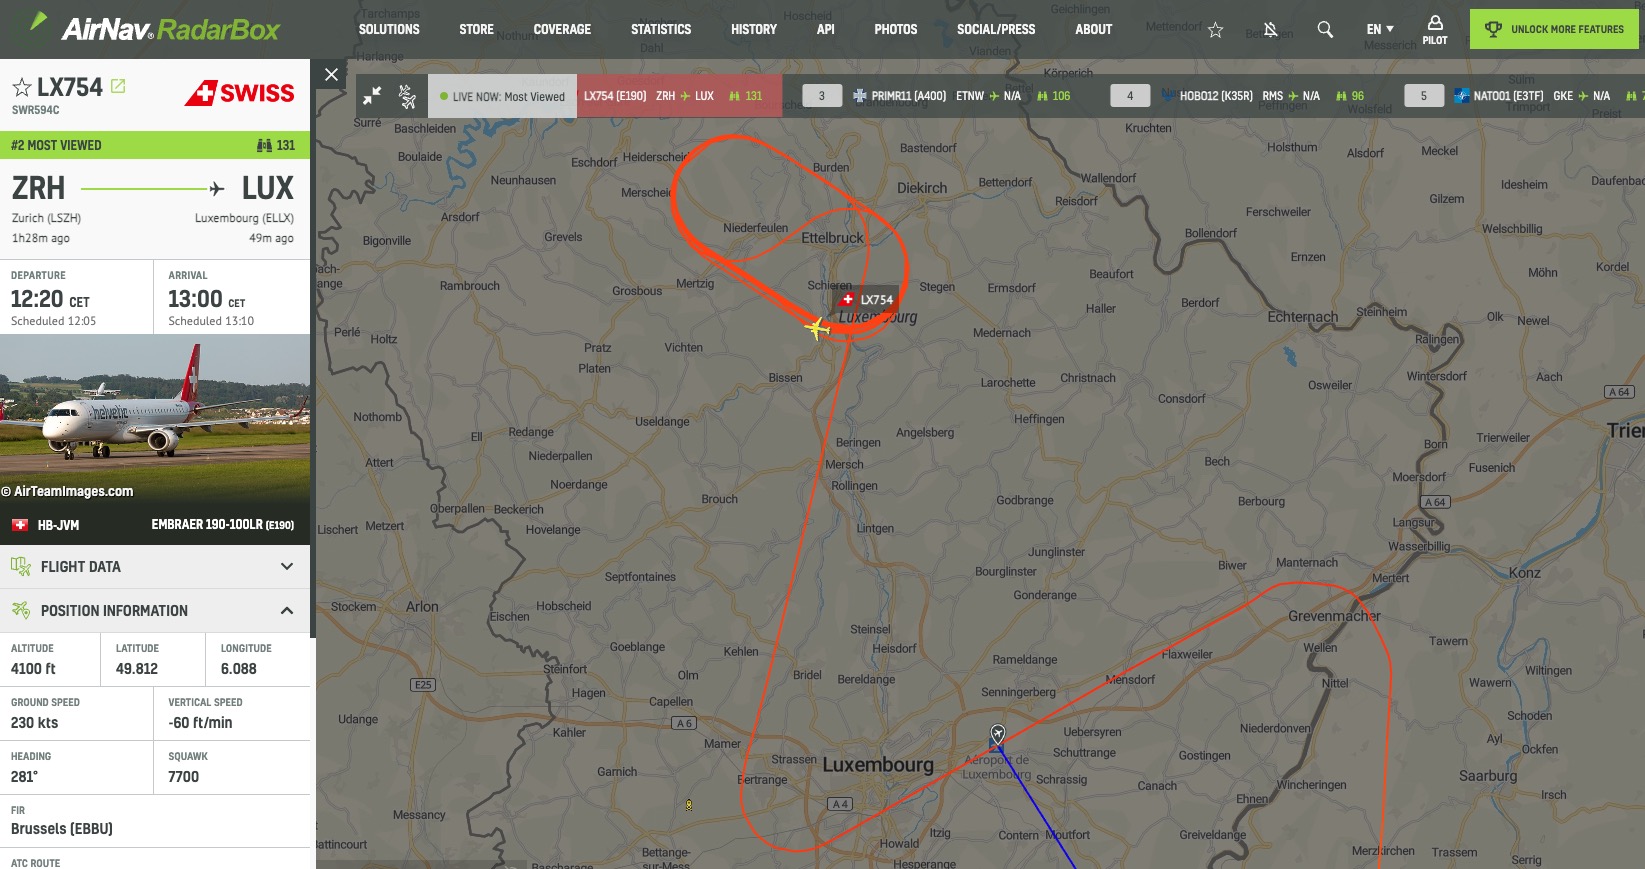 Swiss #LX754 to Luxembourg is holding and declaring an emergency